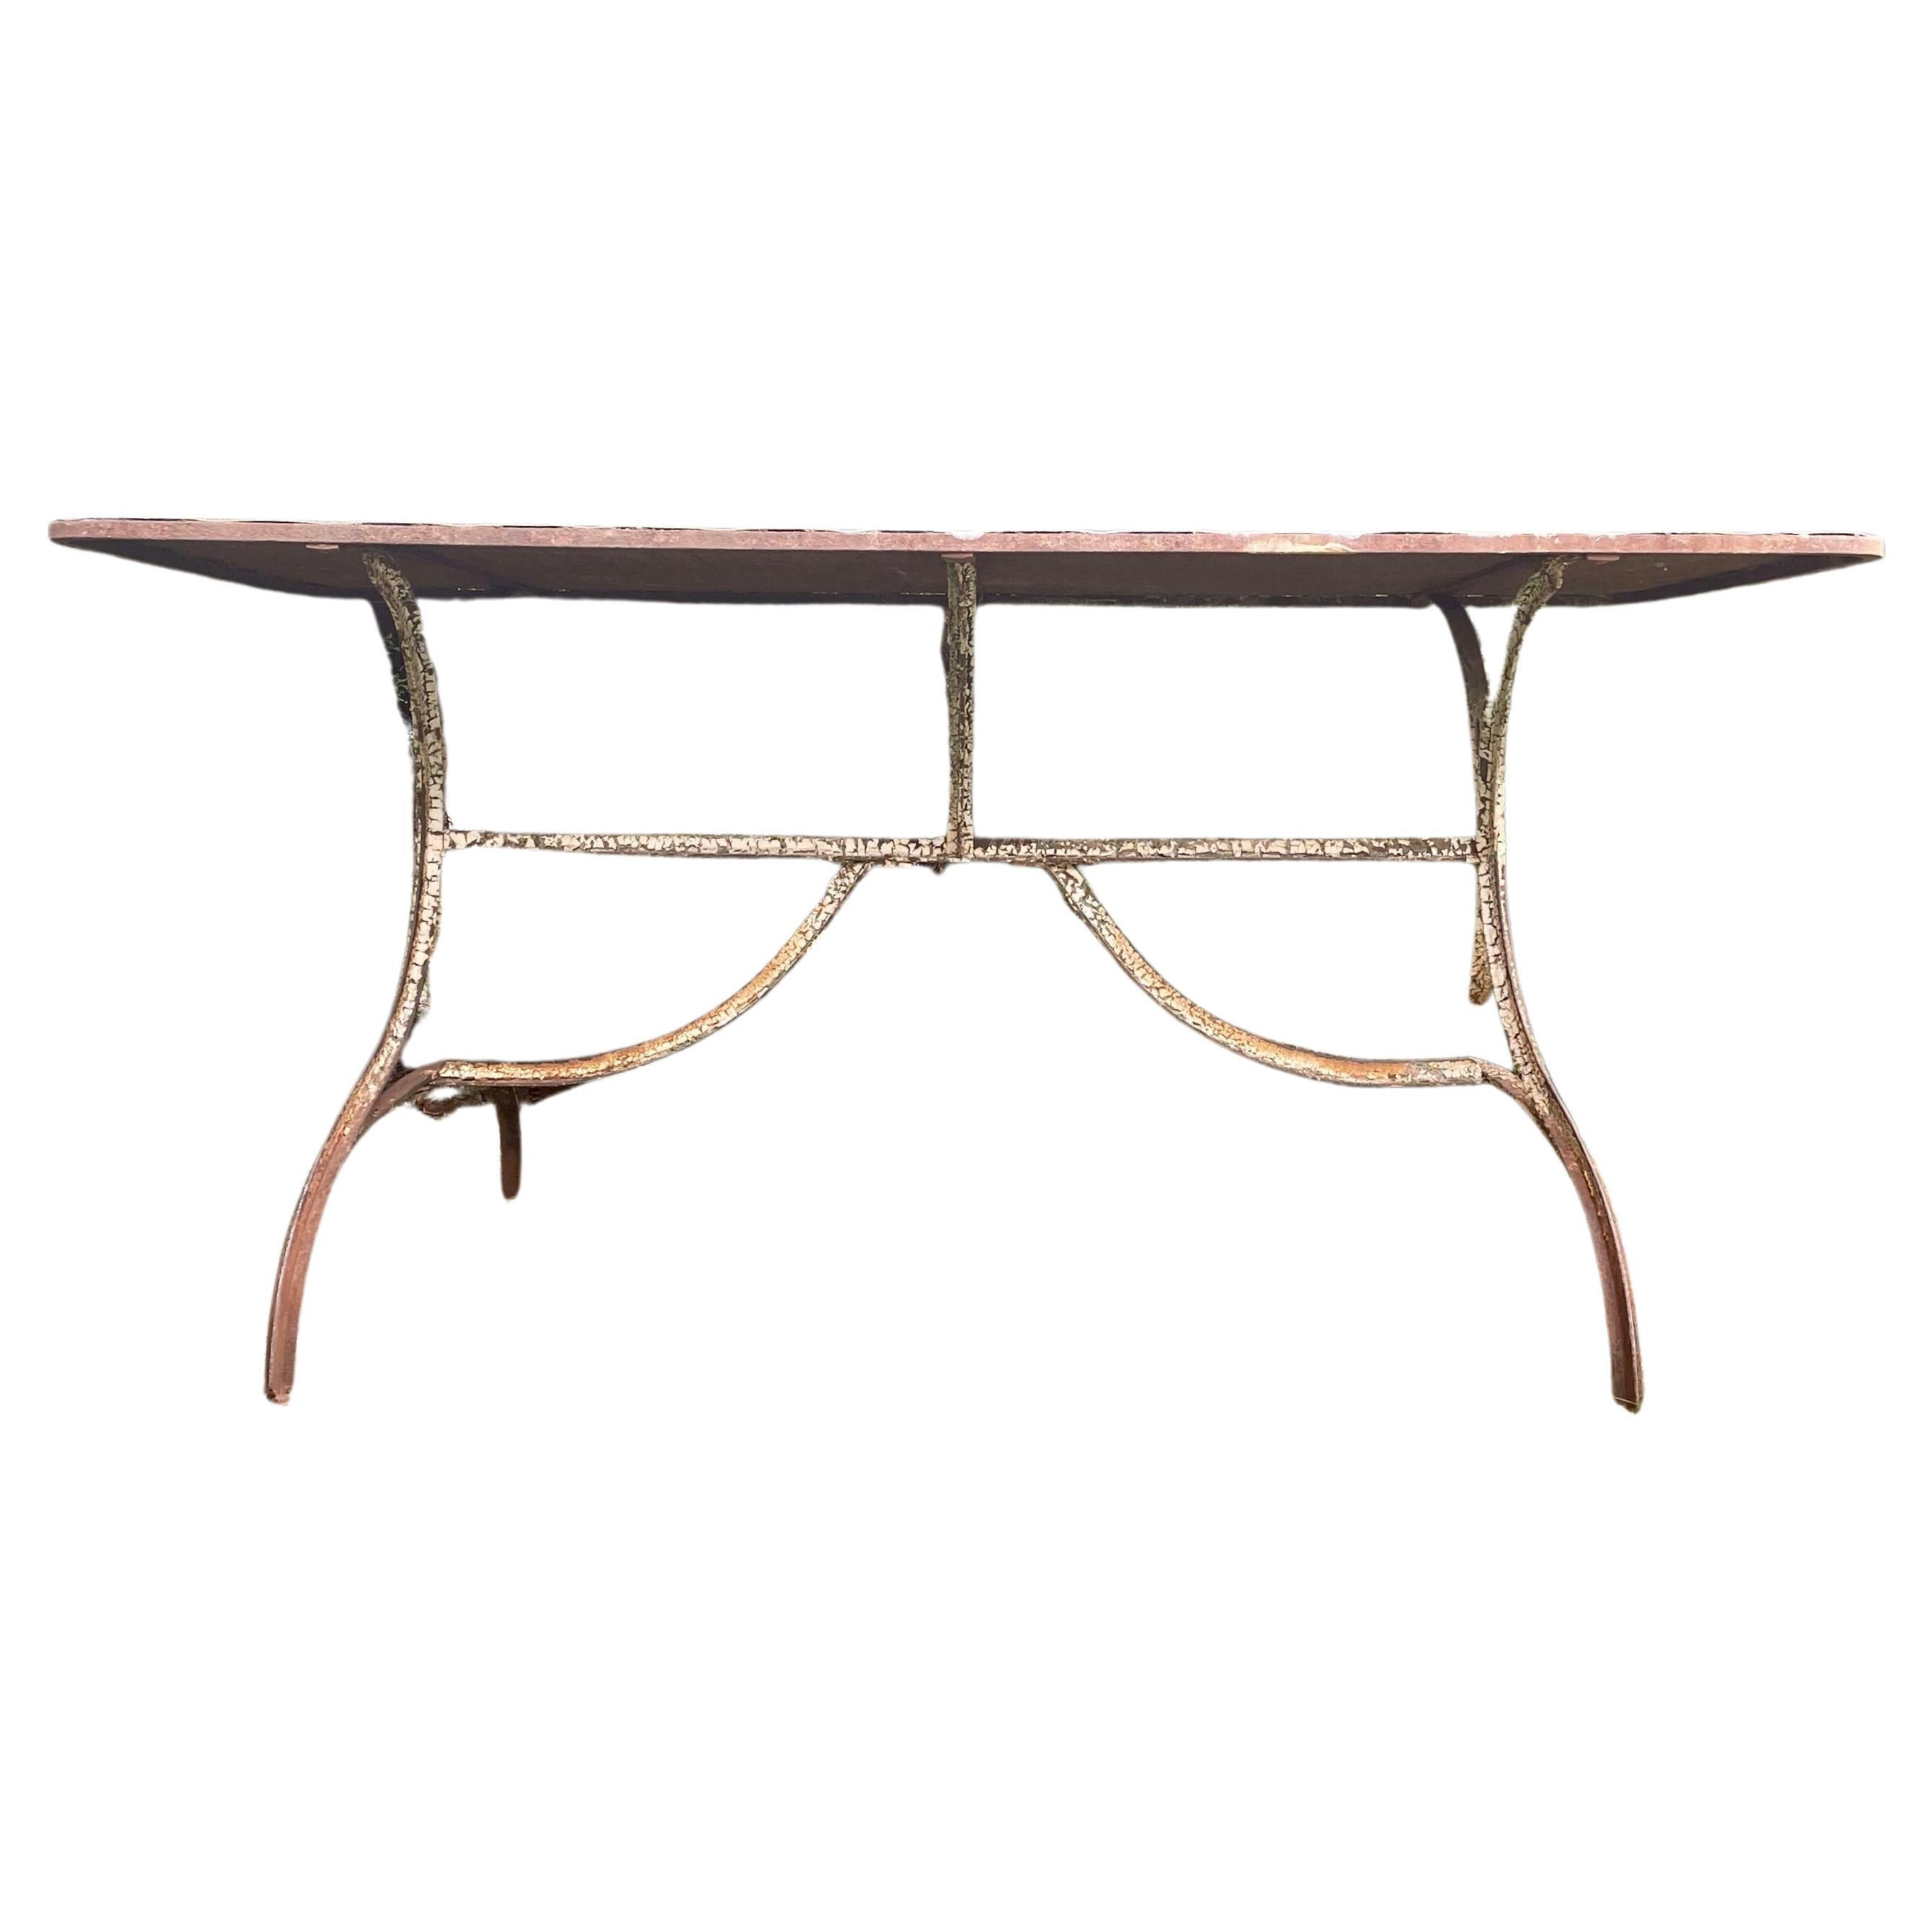 Early 20th C French Rectangular Wrought Iron Dining Table For Sale